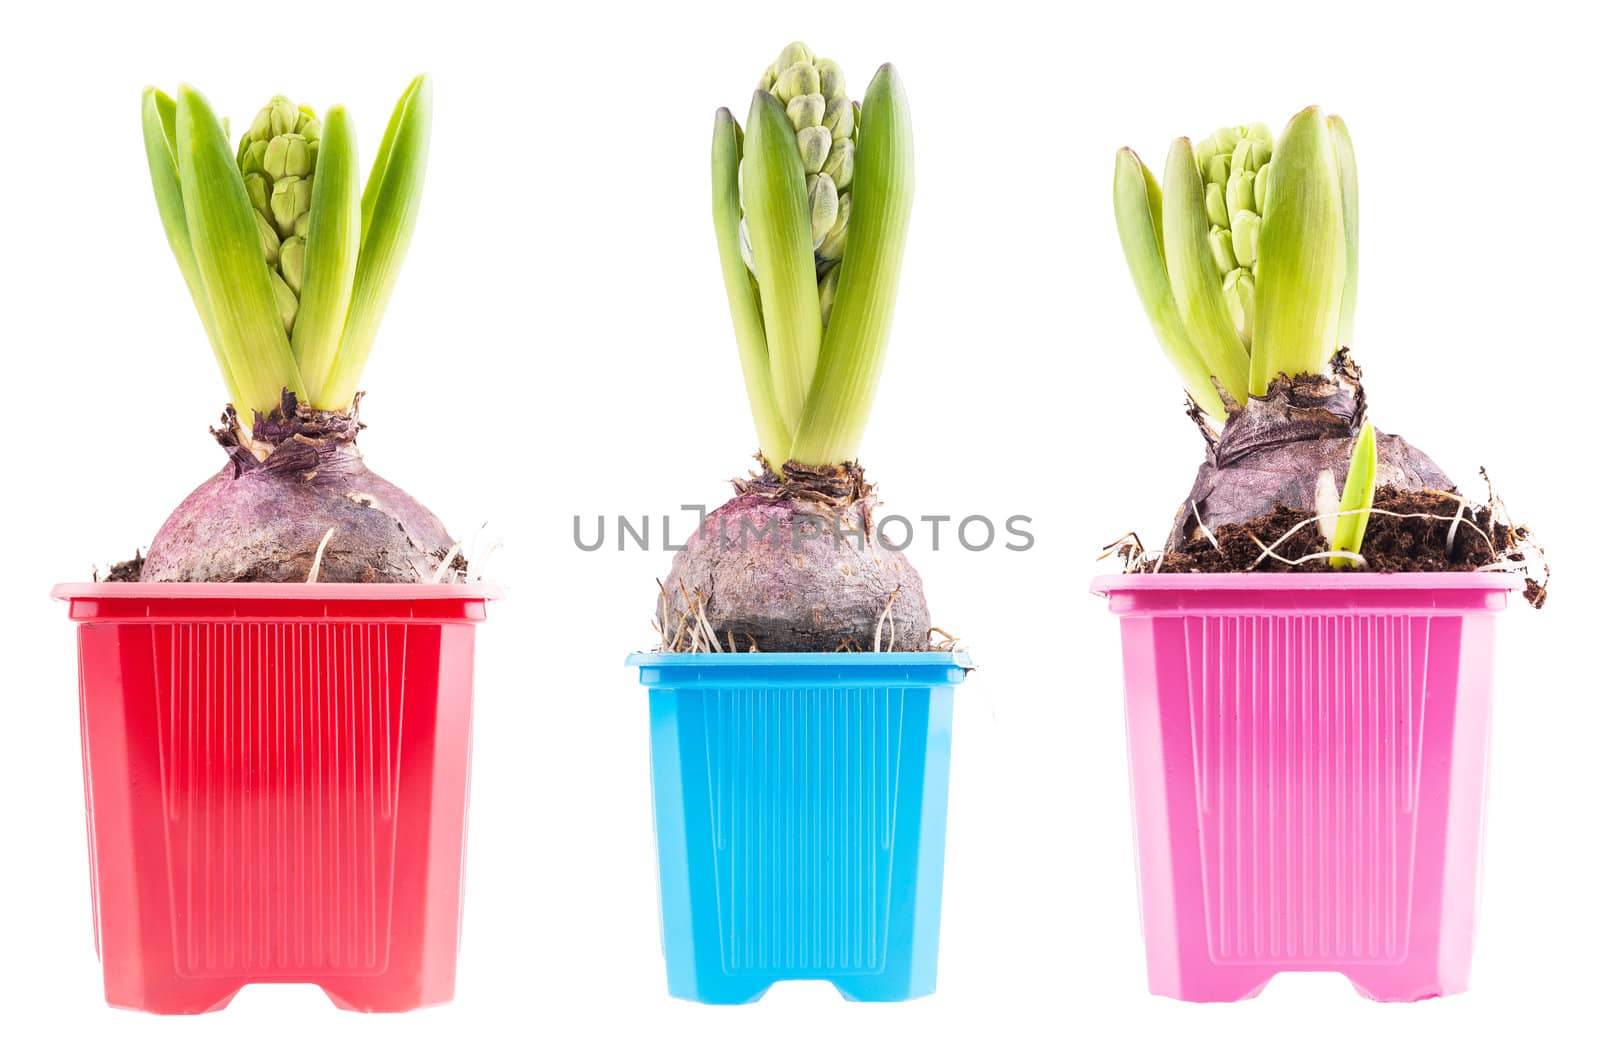 Set of three blossoming hyacinth, isolated